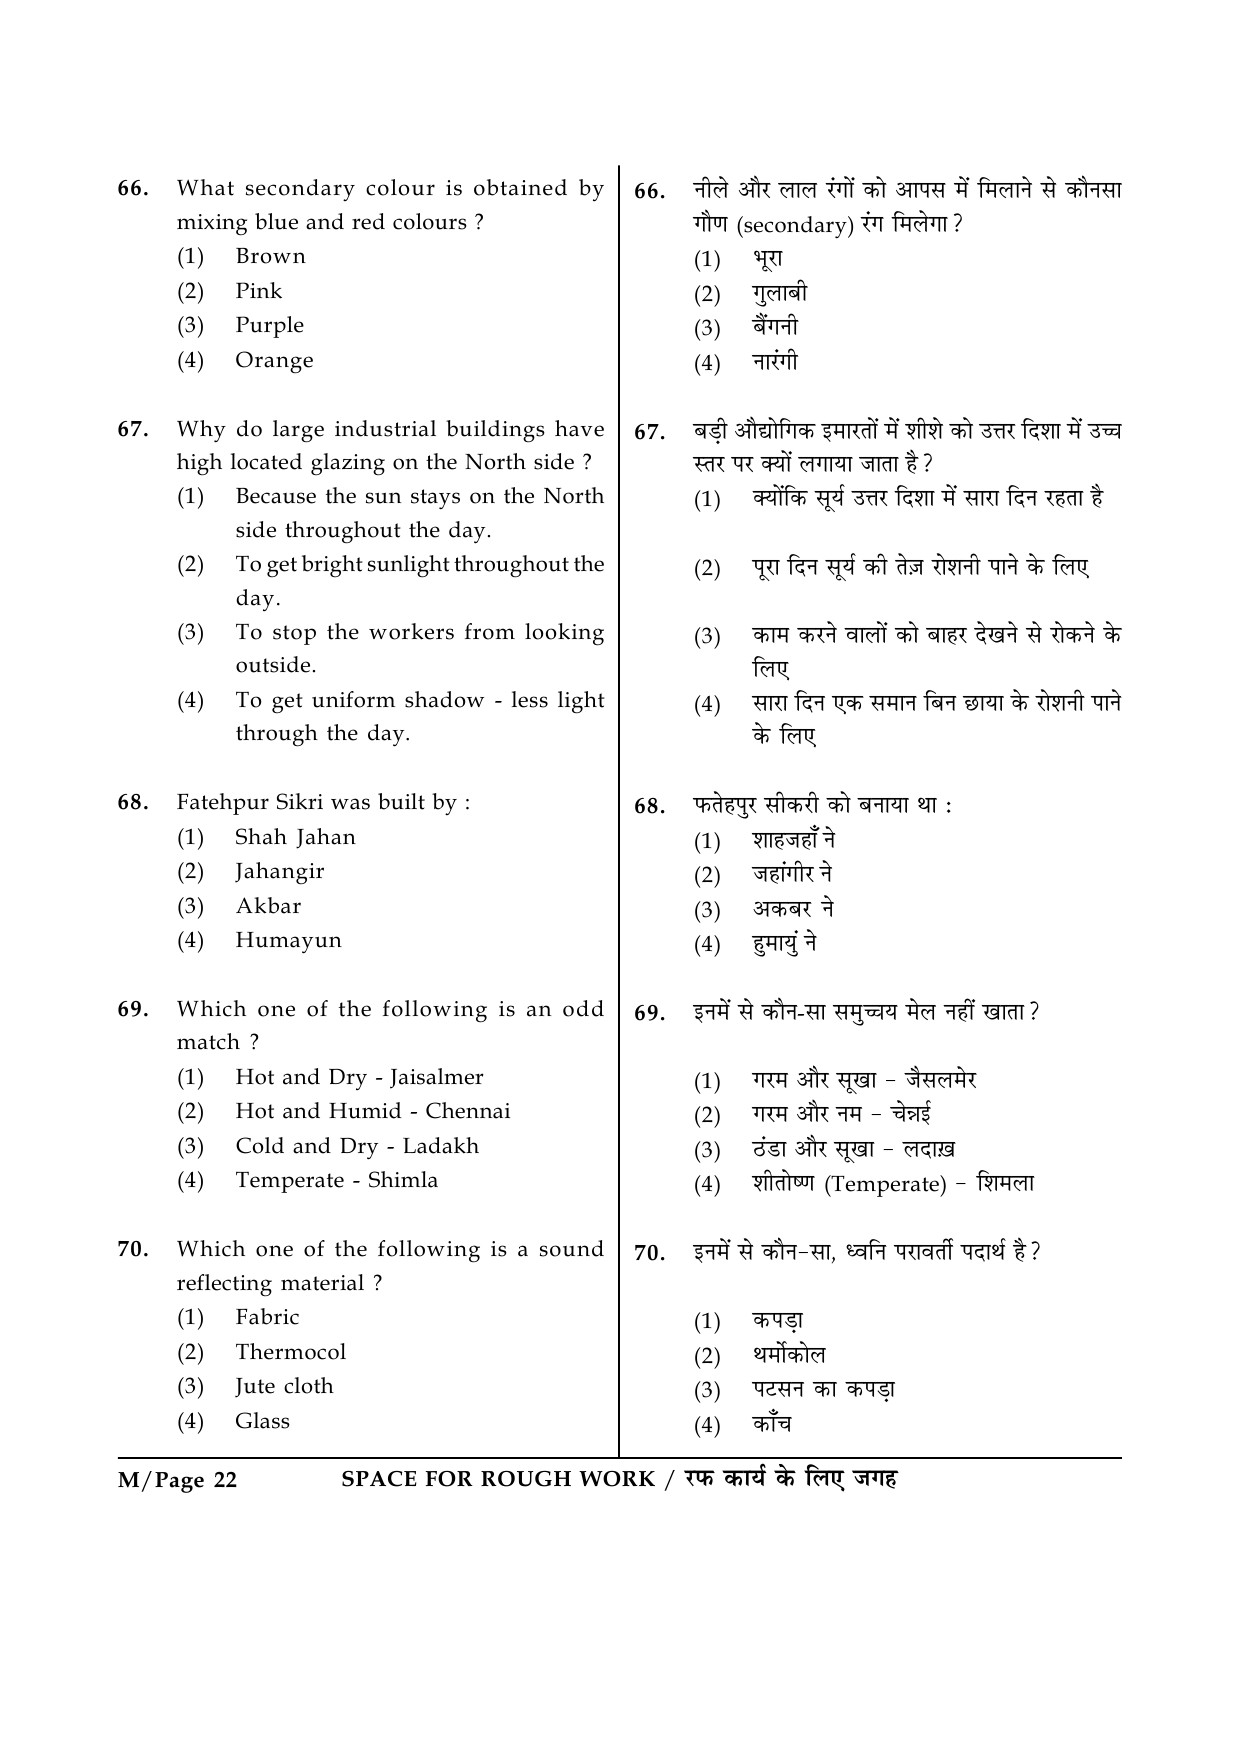 JEE Main Exam Question Paper 2015 Booklet M 22